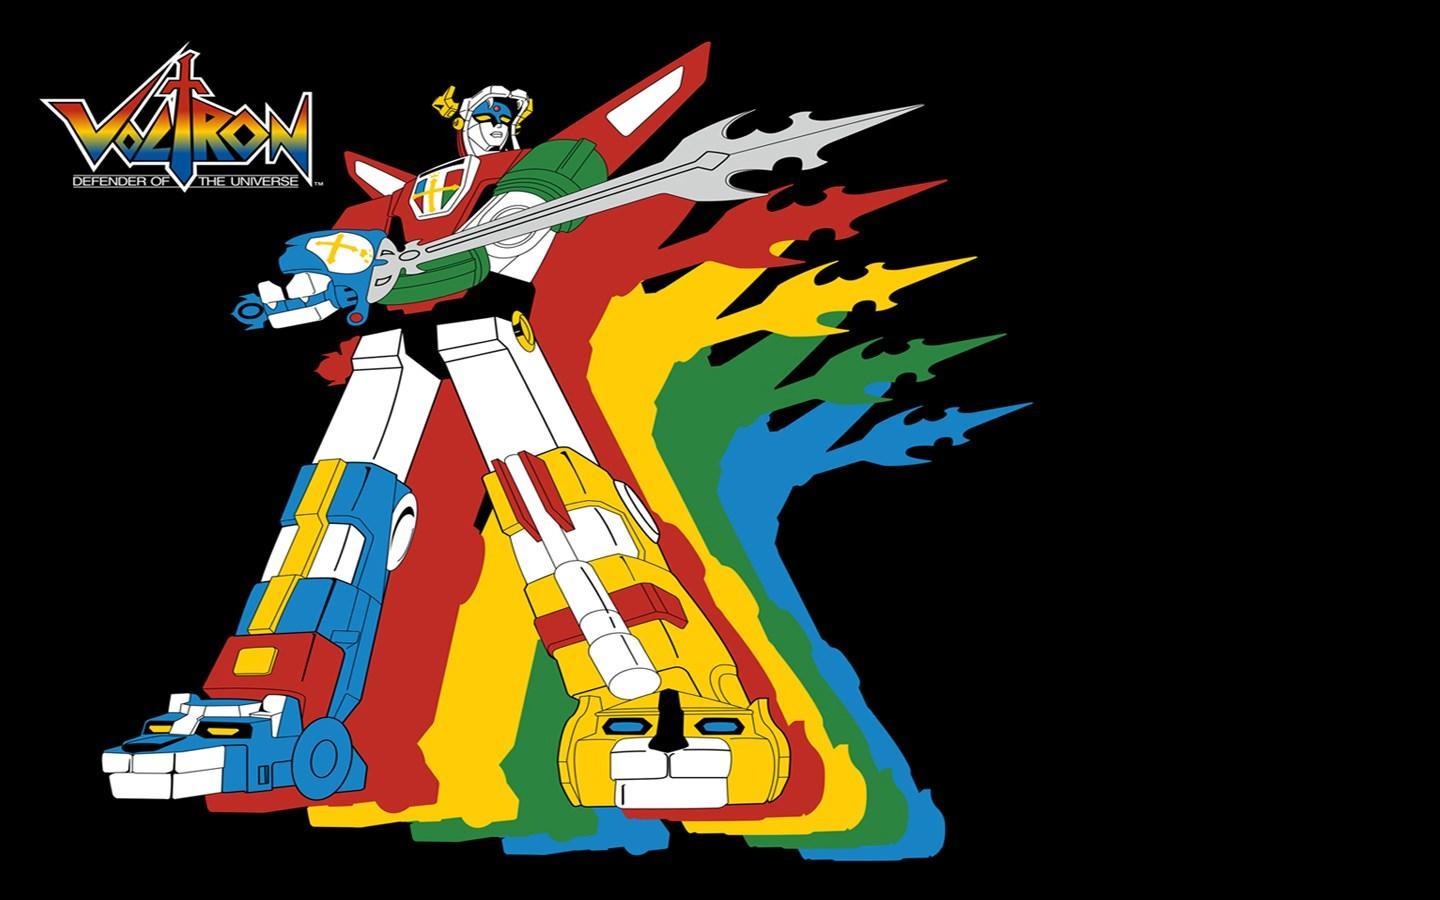 HD wallpaper, Voltron Defender Of The Universe   High Definition Background